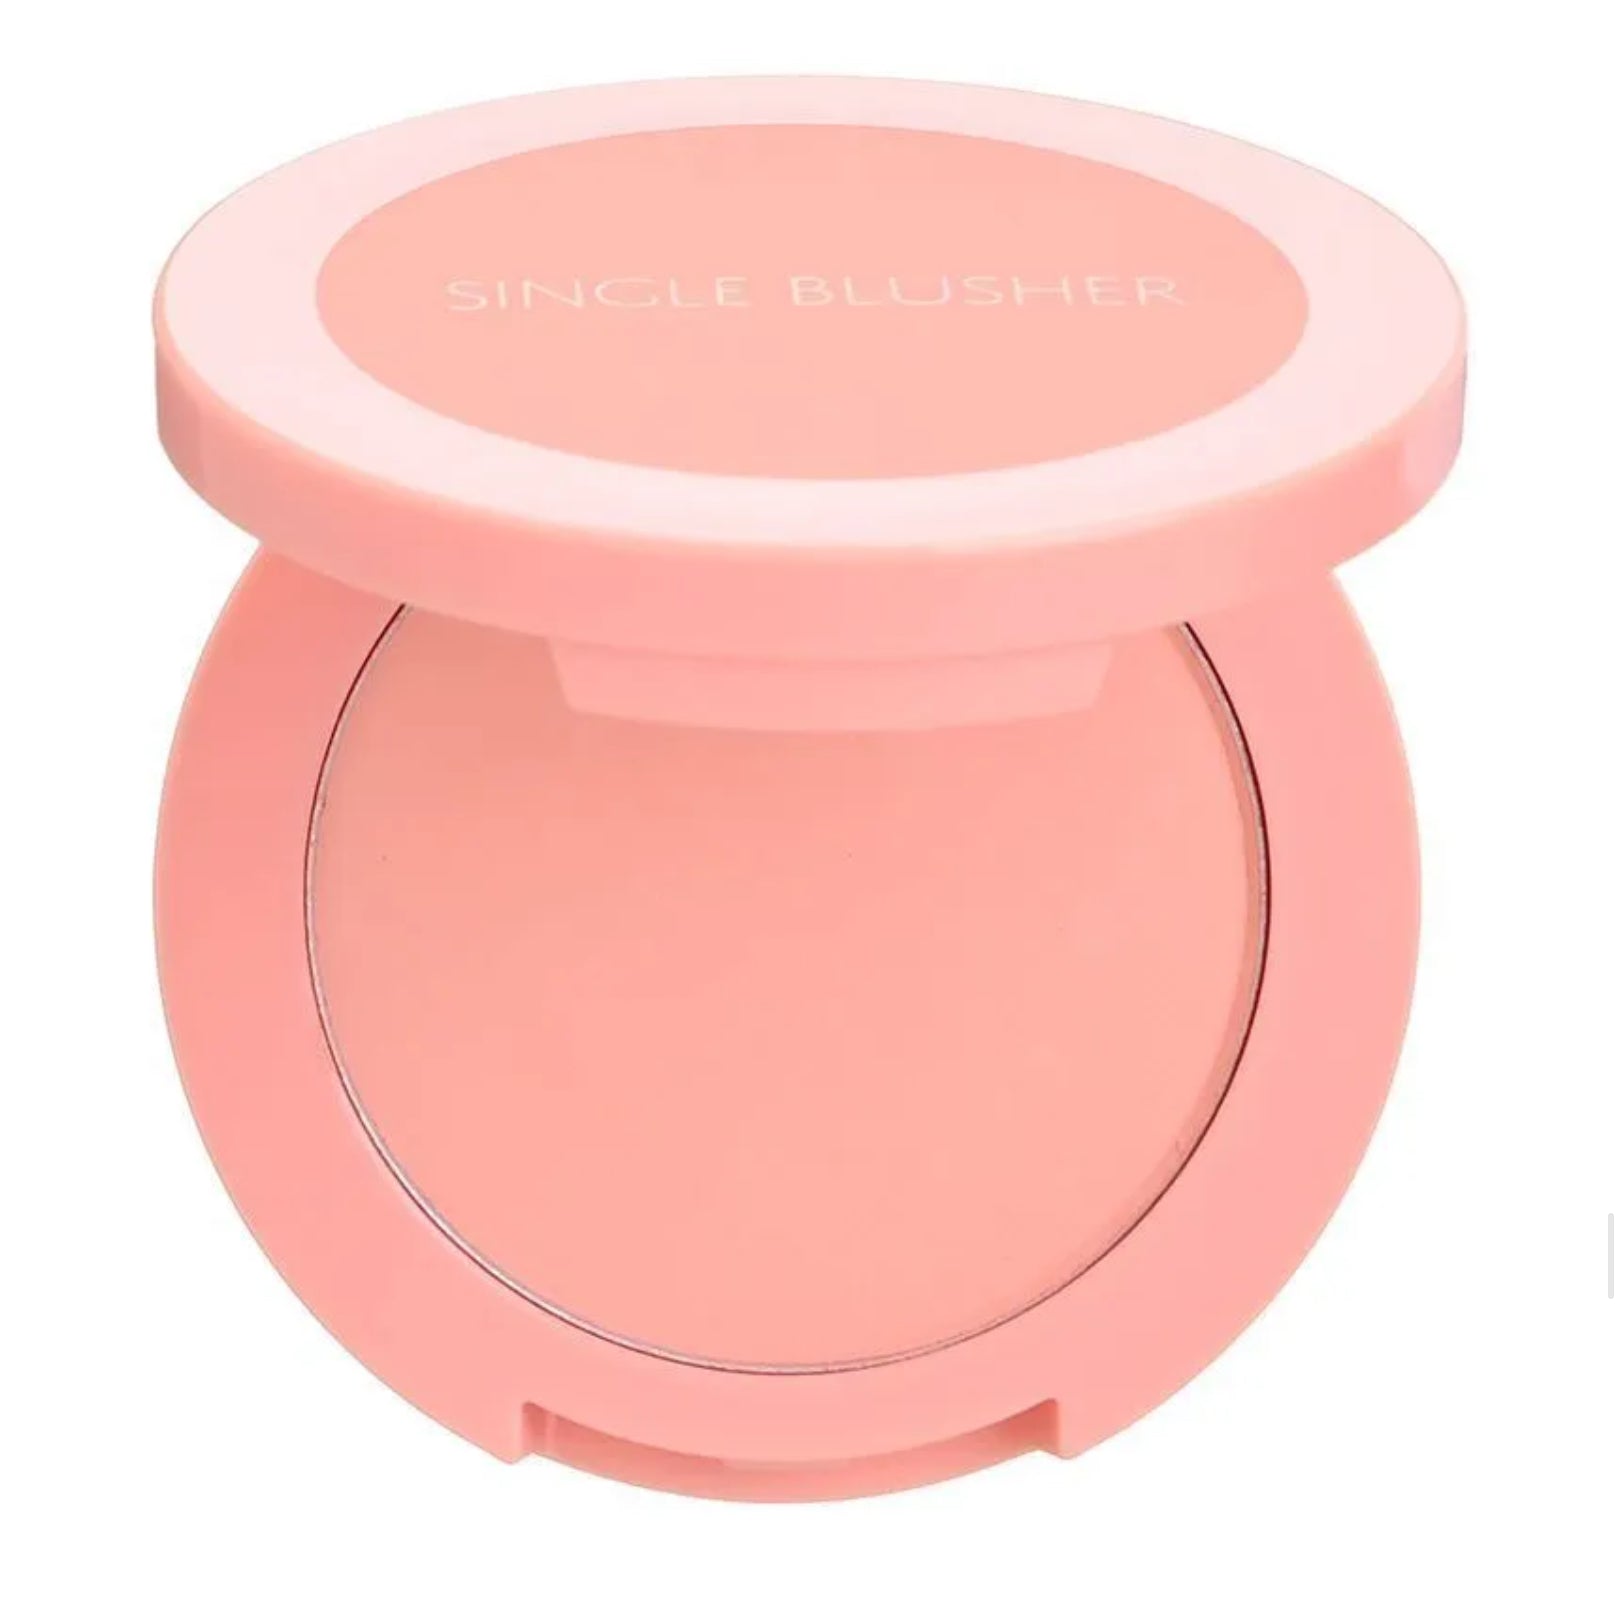 The Saem Saemmul Single Blusher OR06 Apricot Whipping